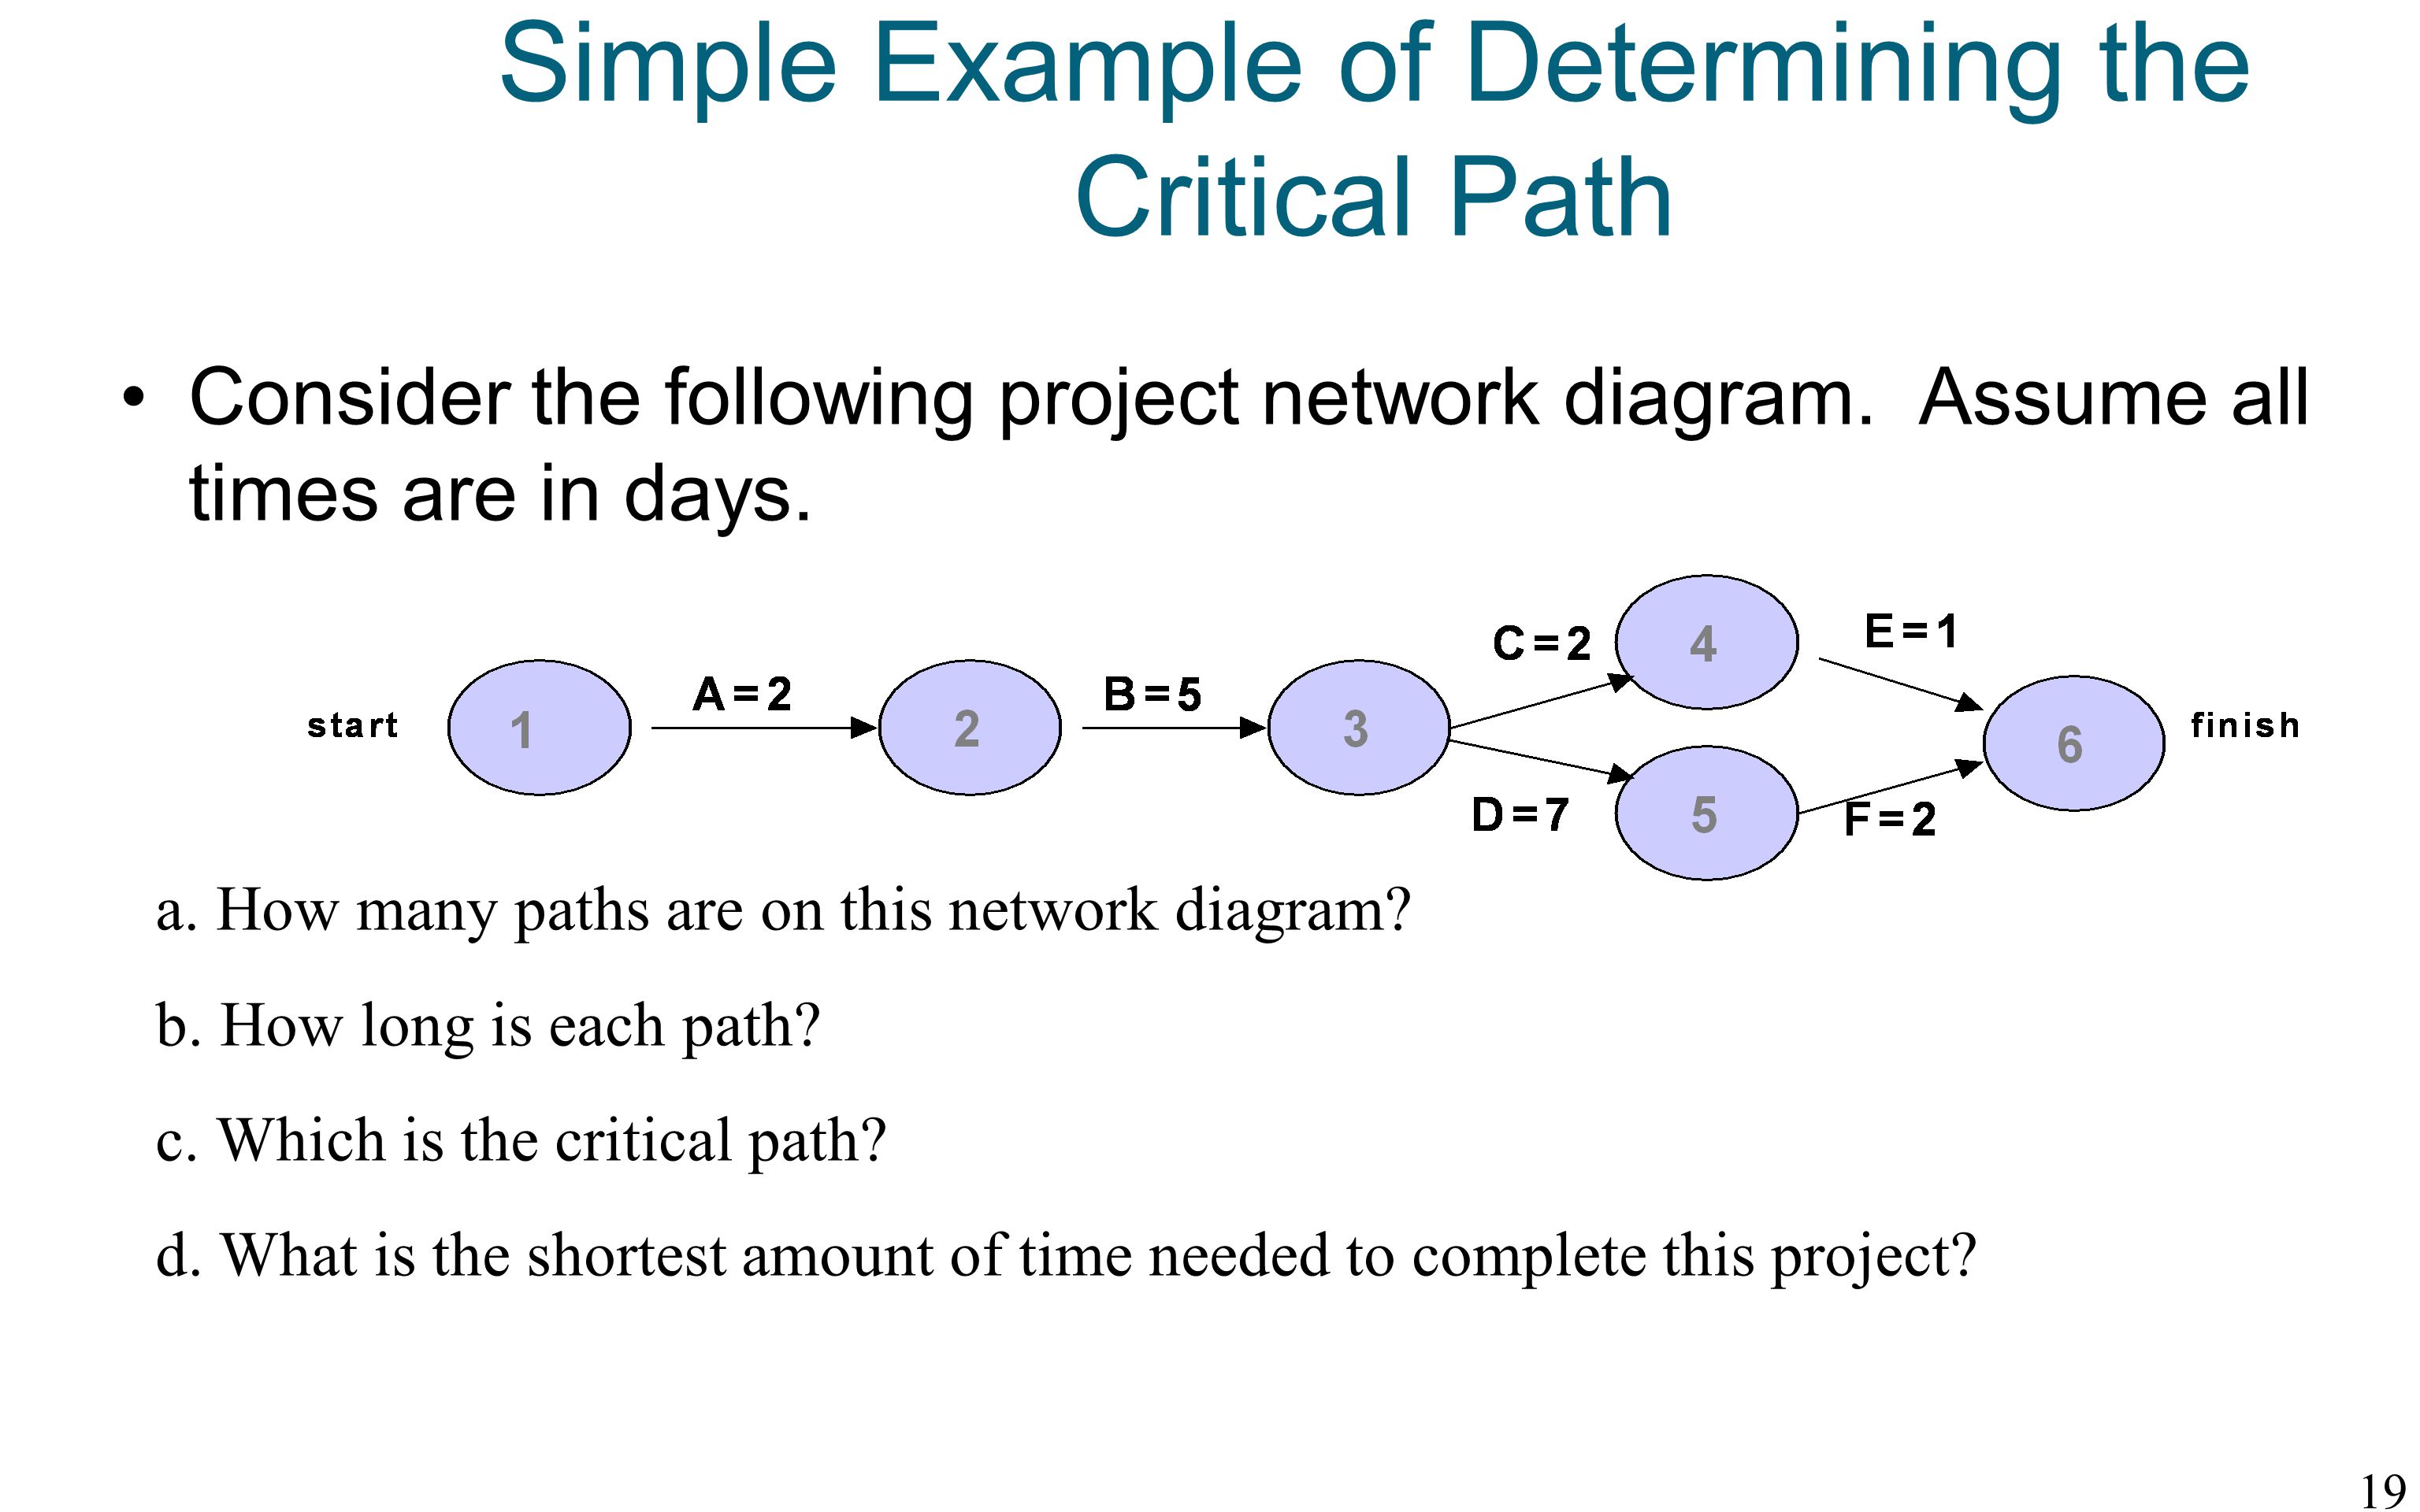 Simple Example of Determining the Critical Path